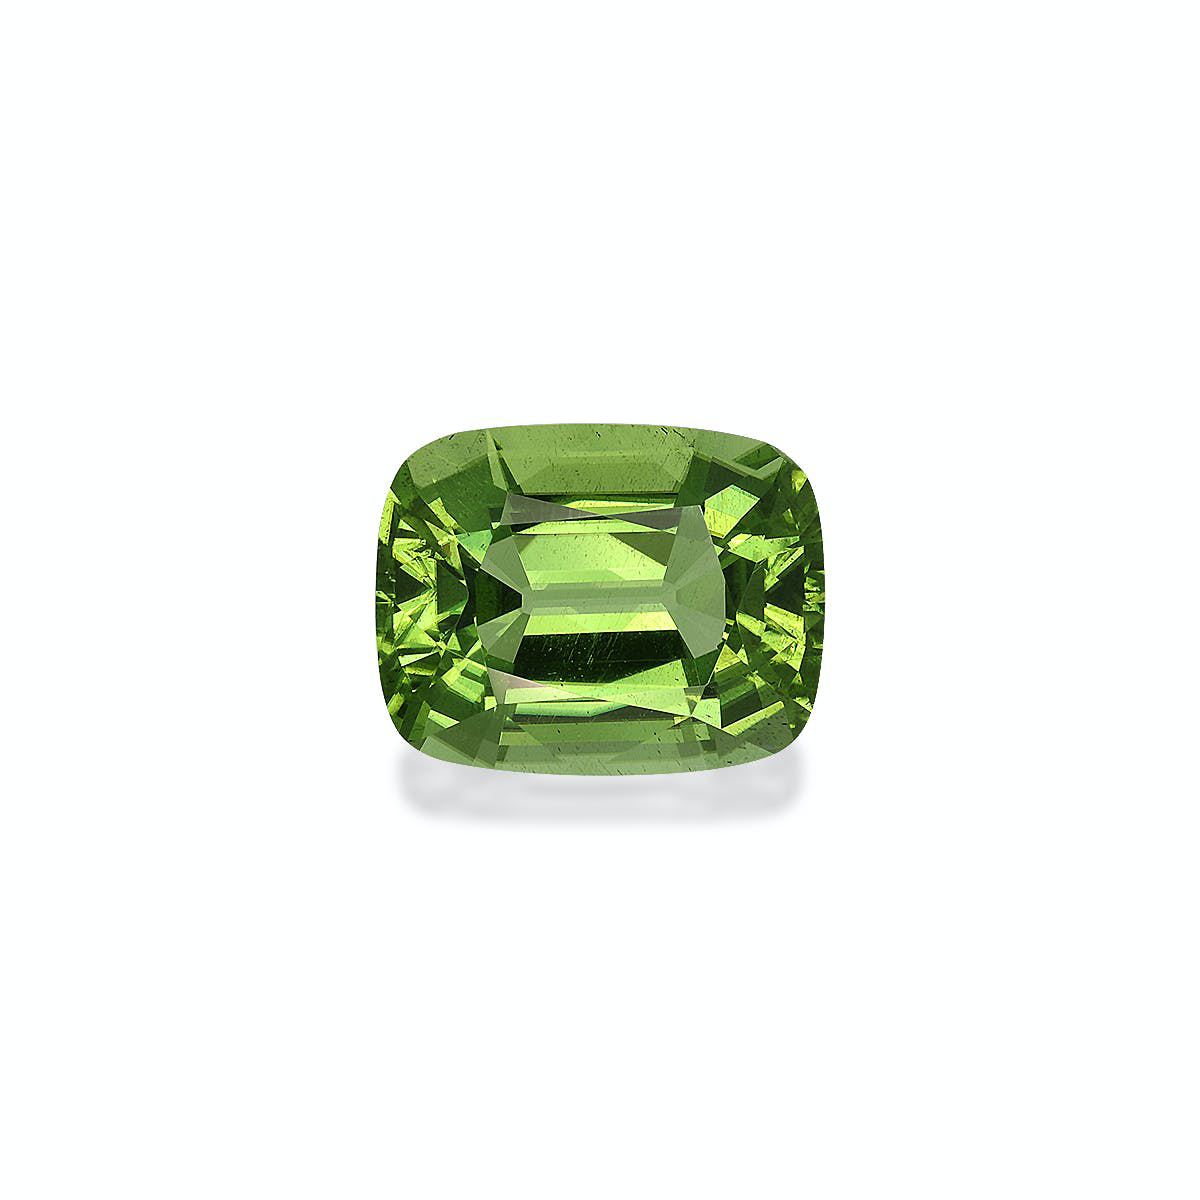 Picture of Lime Green Peridot 13.29ct (PD0341)